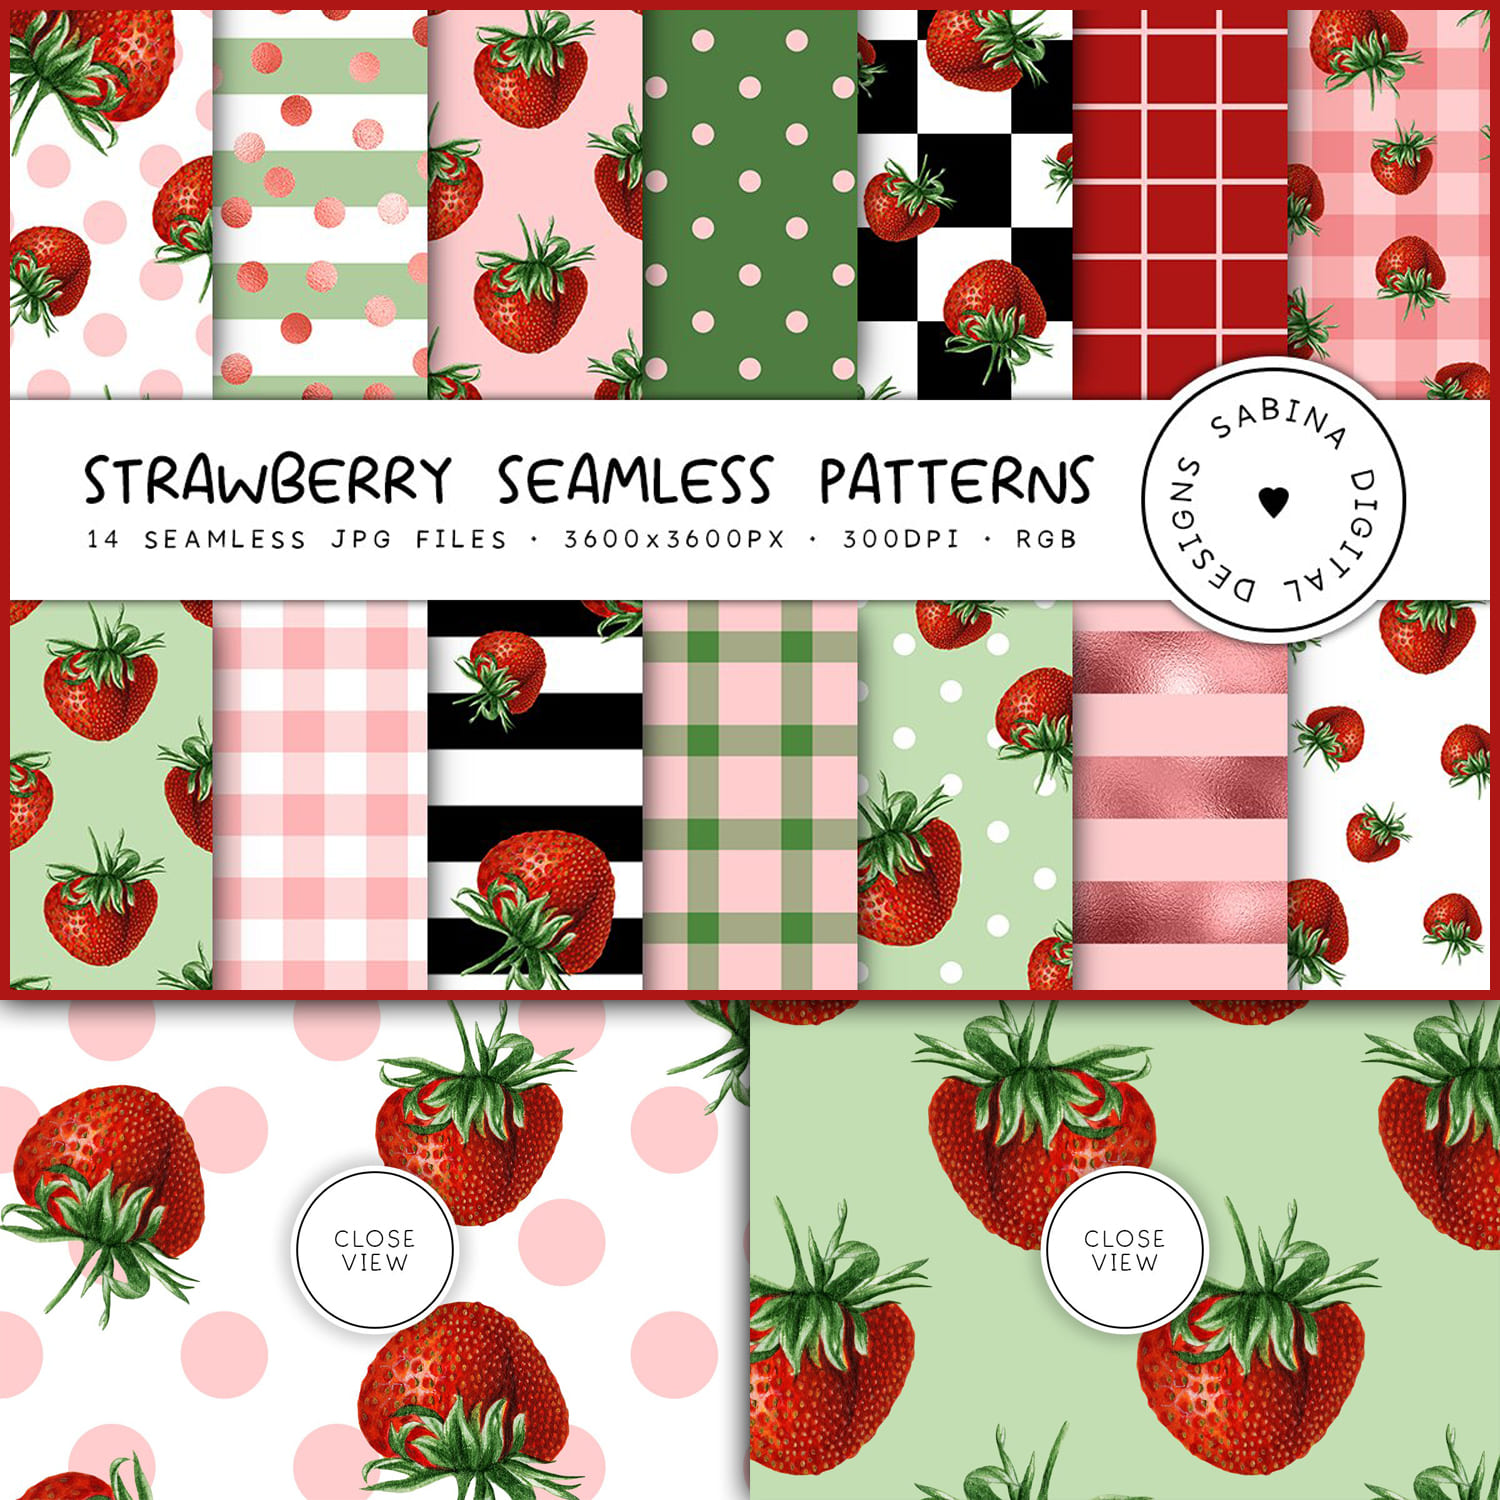 Strawberry Seamless Patterns - main image preview.